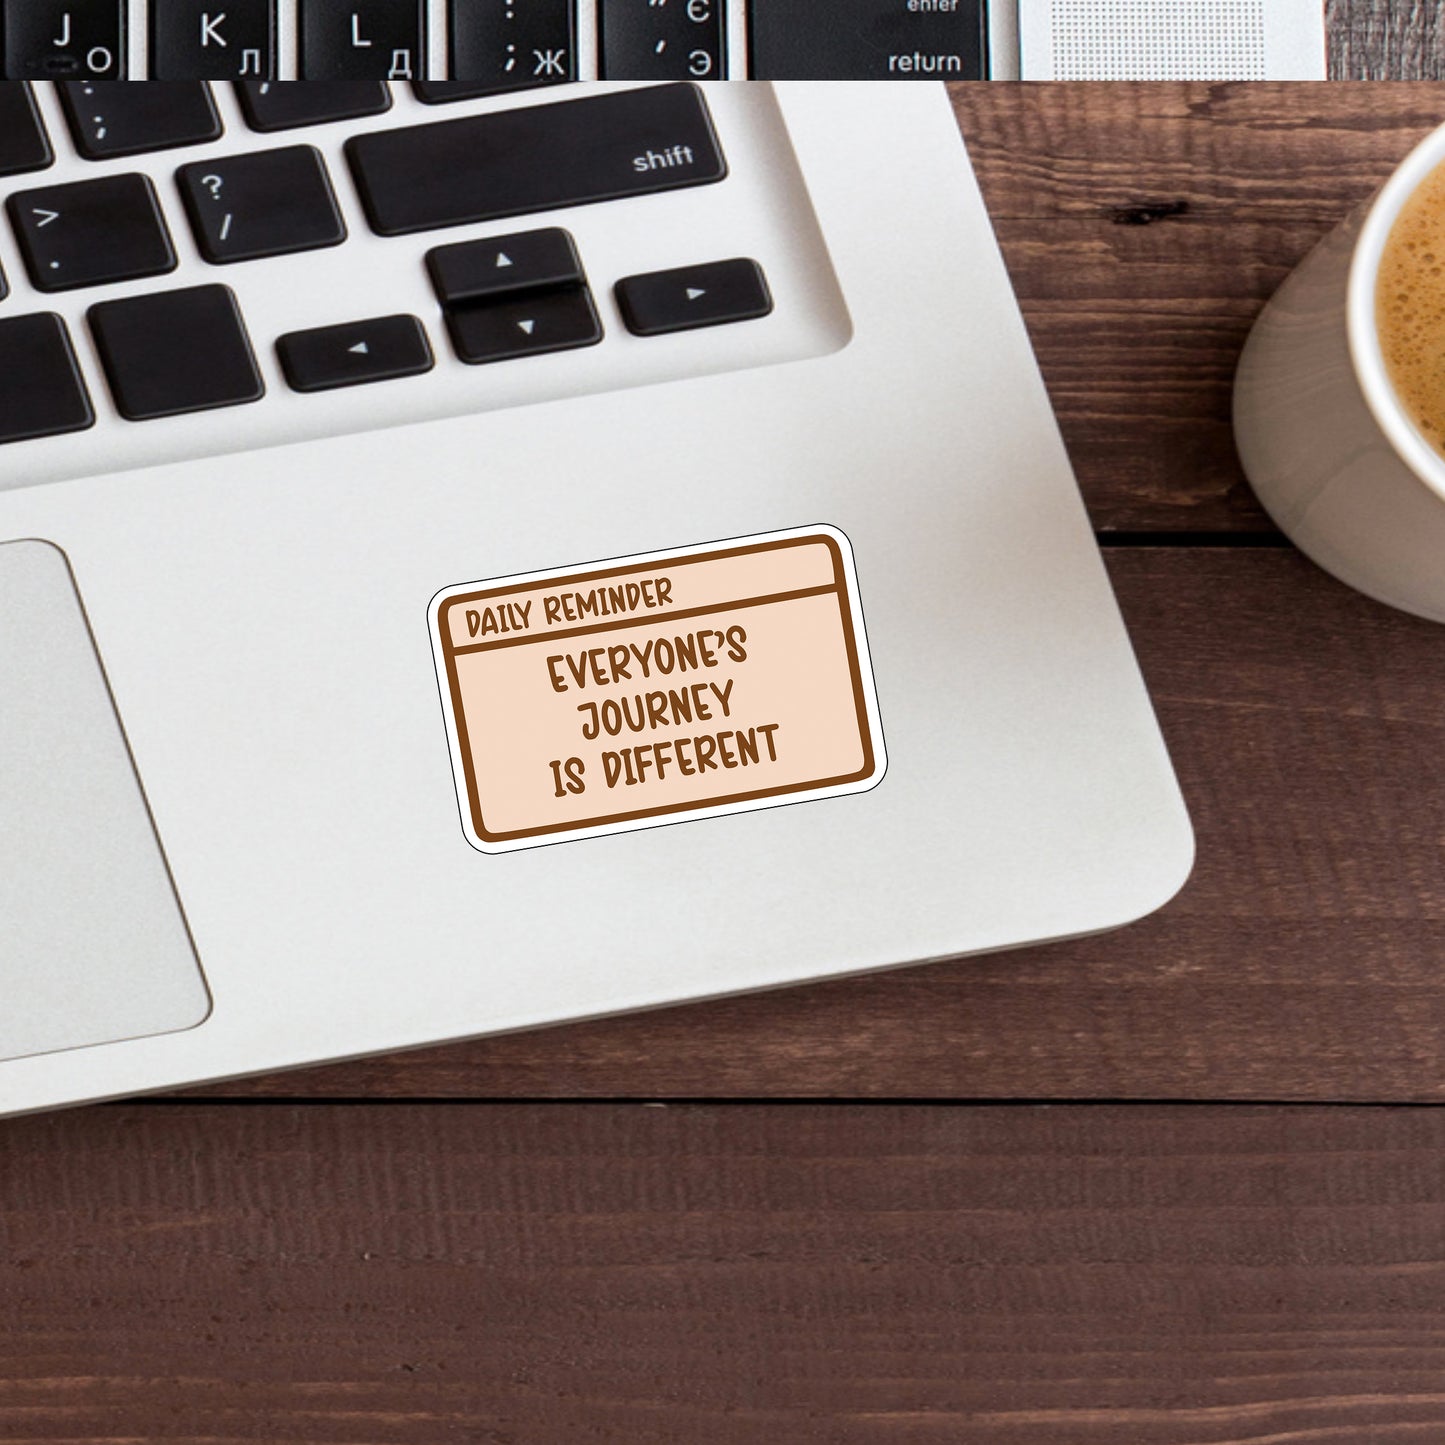 Everyone's Journey is Different Sticker, Express Yourself with our Unique Vinyl Stickers for Laptops, Tablets, and More!